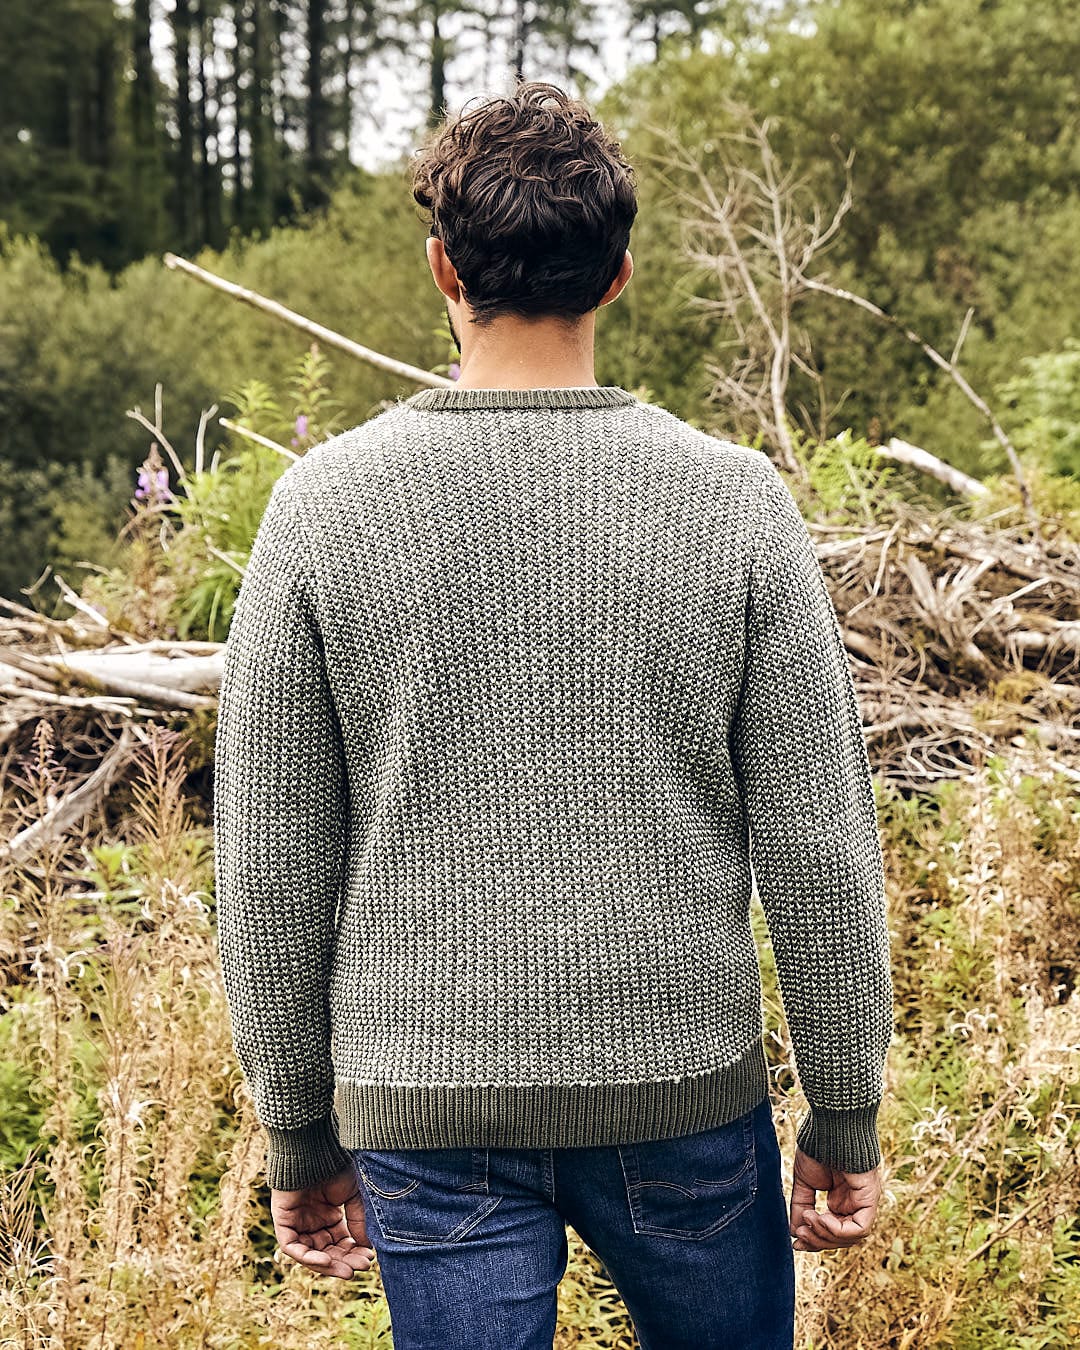 The back of a man standing in a wooded area wearing the Saltrock Arlen - Mens Crew Knit - Dark Green sweater.